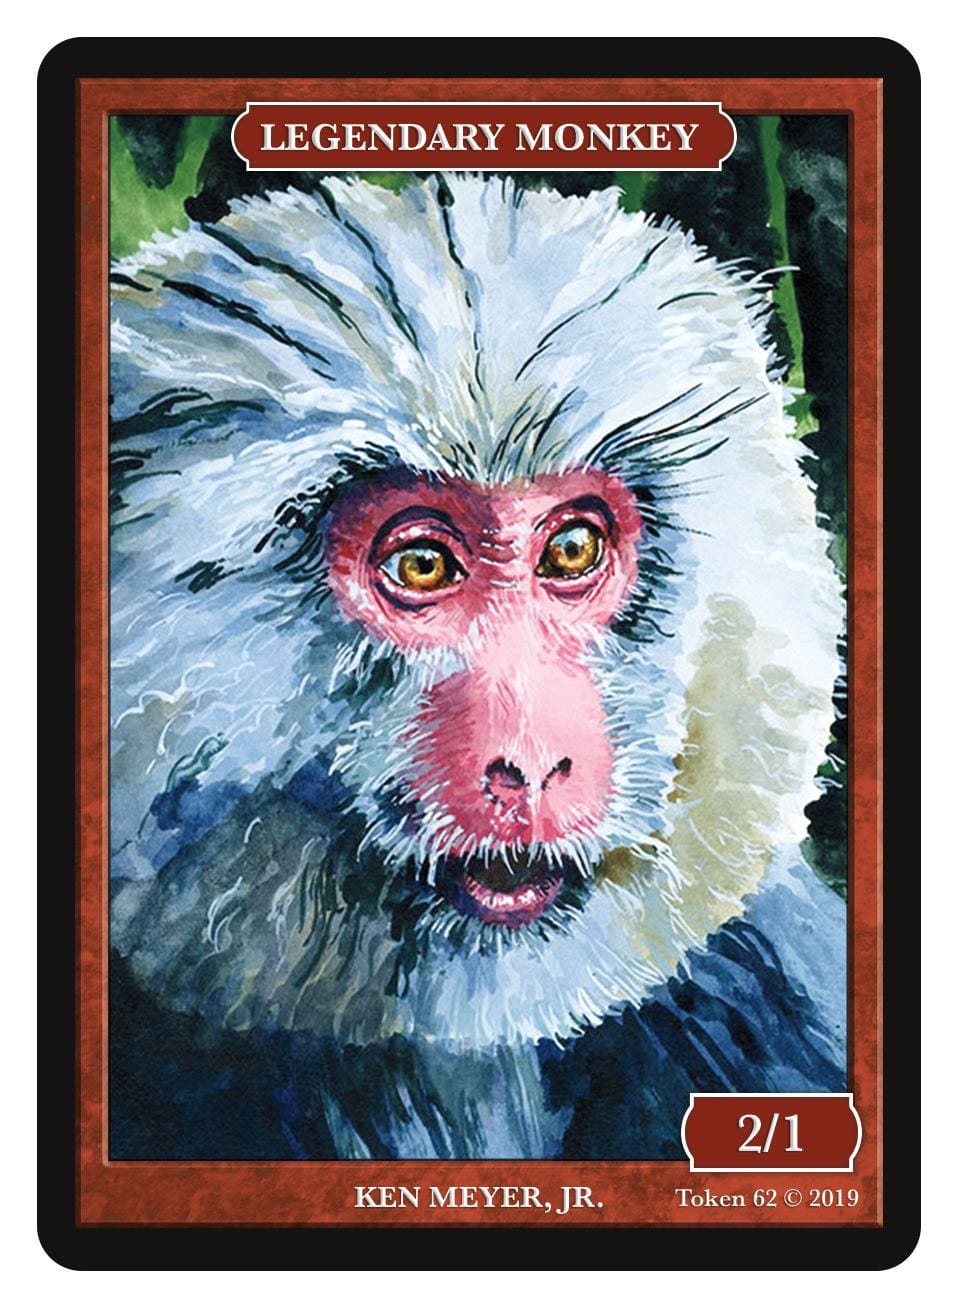 Legendary Monkey Token (2/1) by Ken Meyer Jr. - Token - Original Magic Art - Accessories for Magic the Gathering and other card games